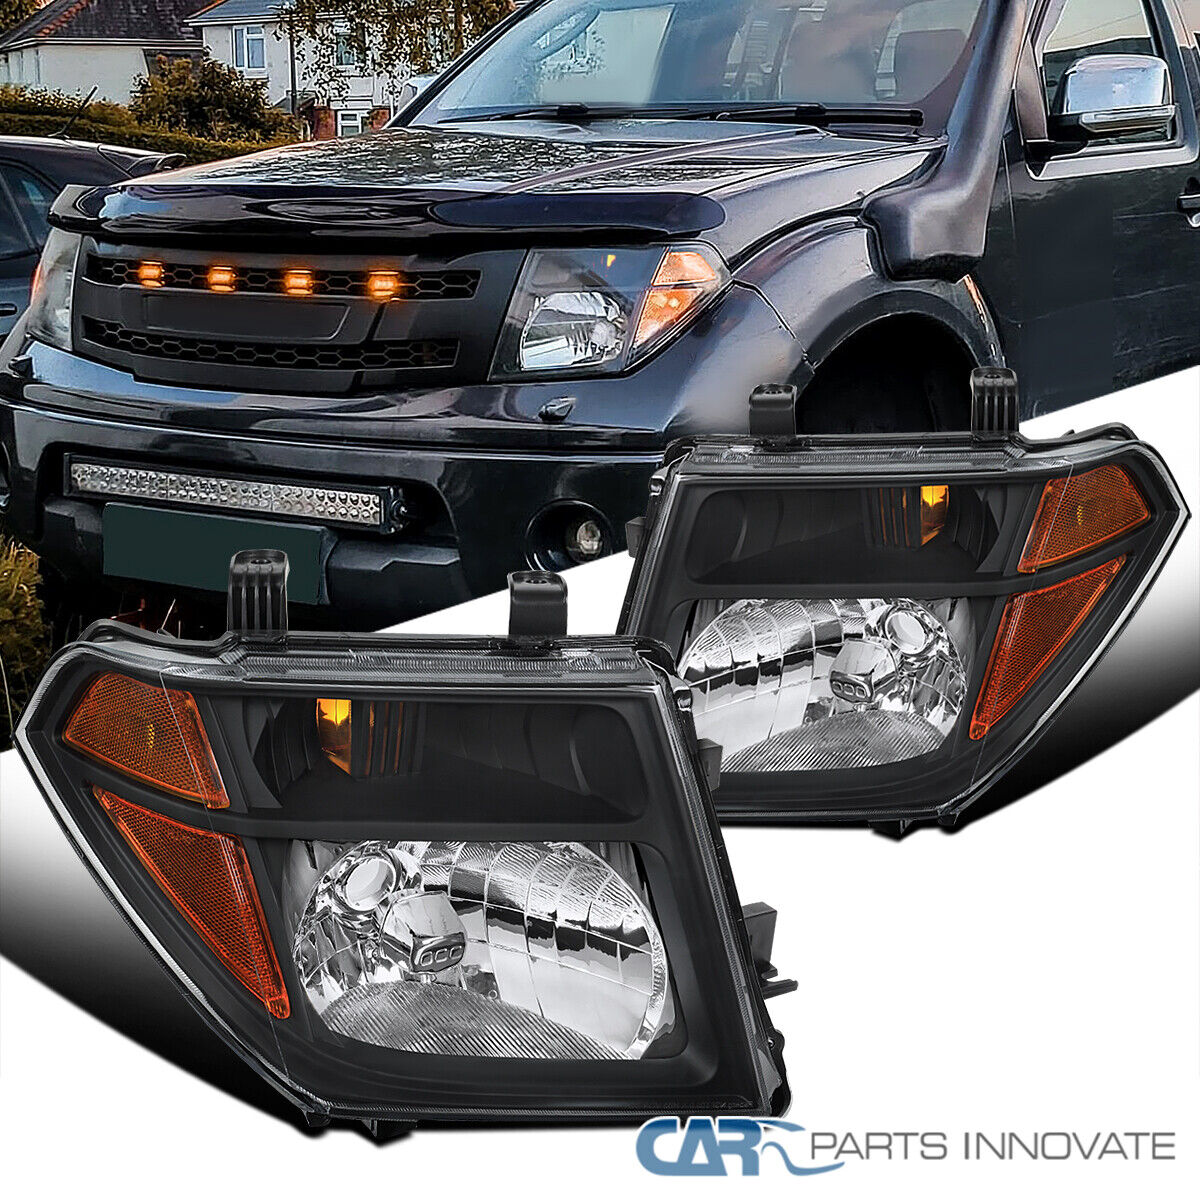 Black Fit 2005-2008 Frontier 2005-2007 Pathfinder Headlights Head Lamps Assembly